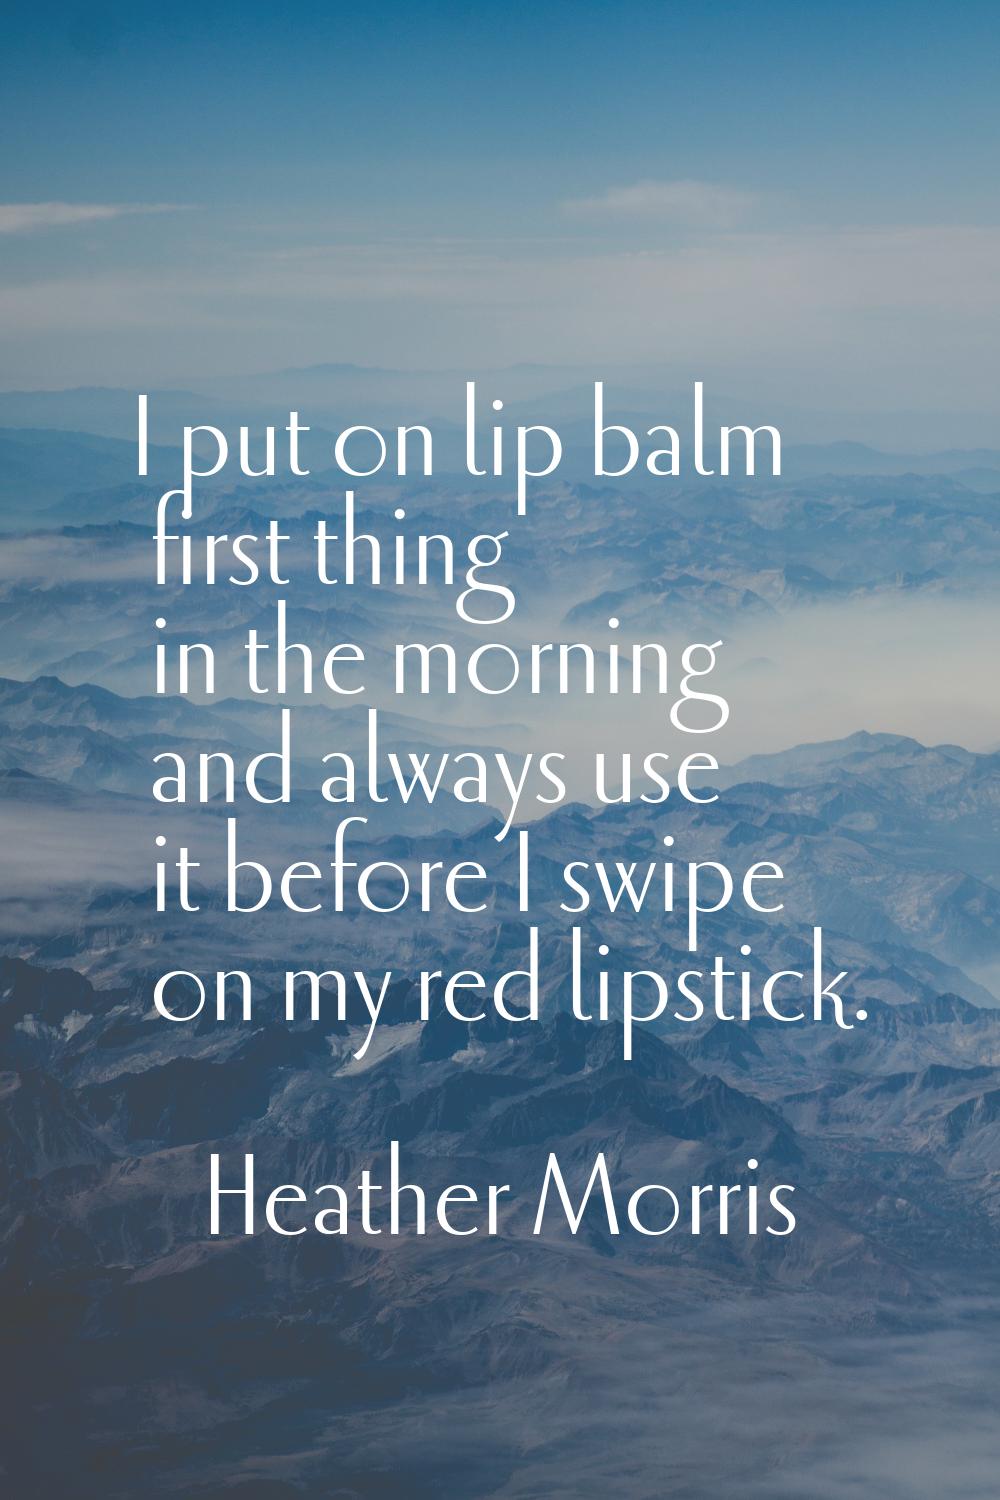 I put on lip balm first thing in the morning and always use it before I swipe on my red lipstick.